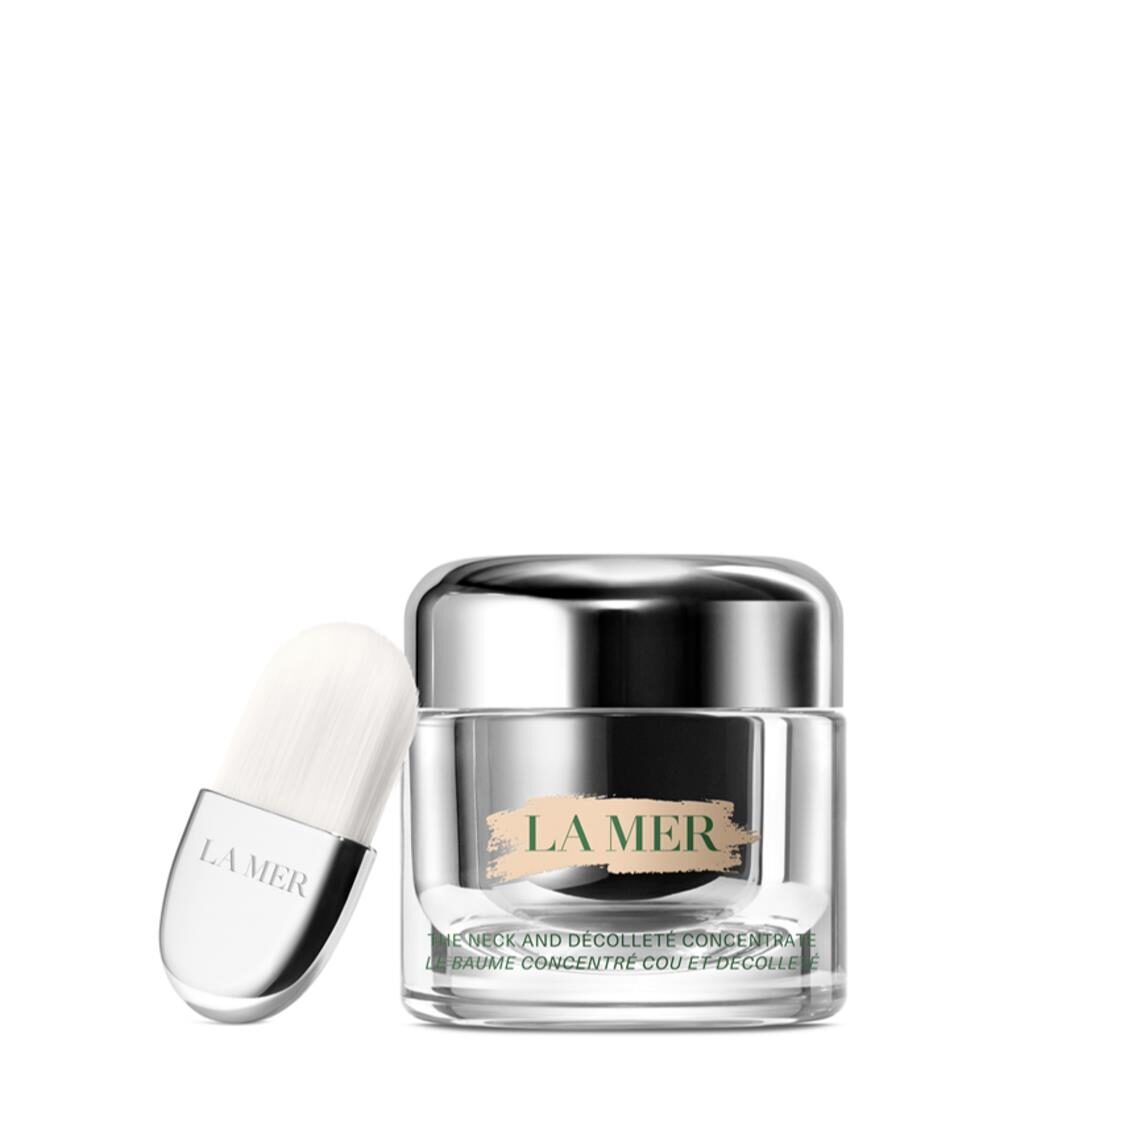 La Mer The Neck and Dcollet Concentrate 50ml